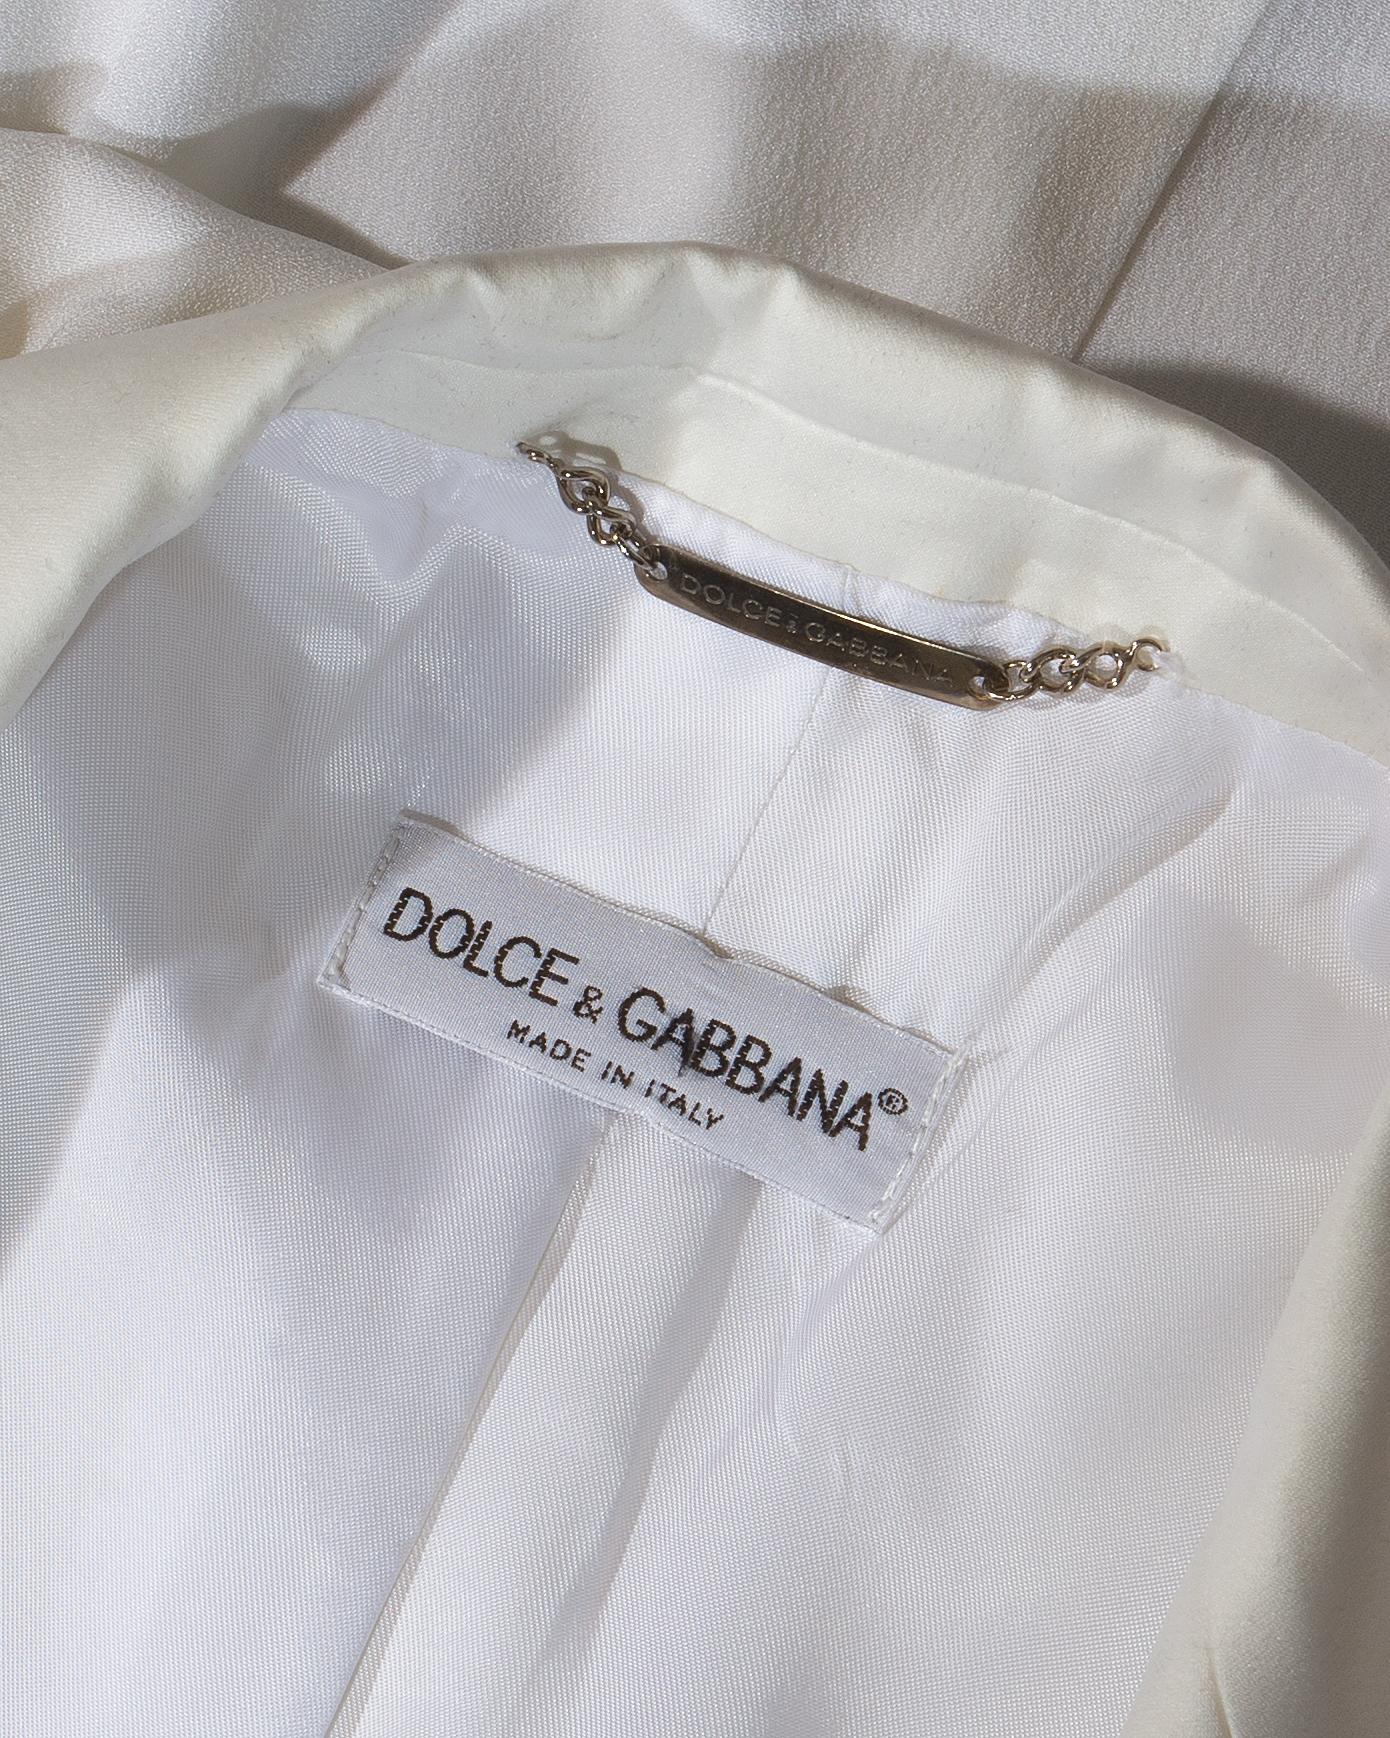 Dolce & Gabbana white crepe and satin Bianca Jagger pant suit, ss 1995 For Sale 2